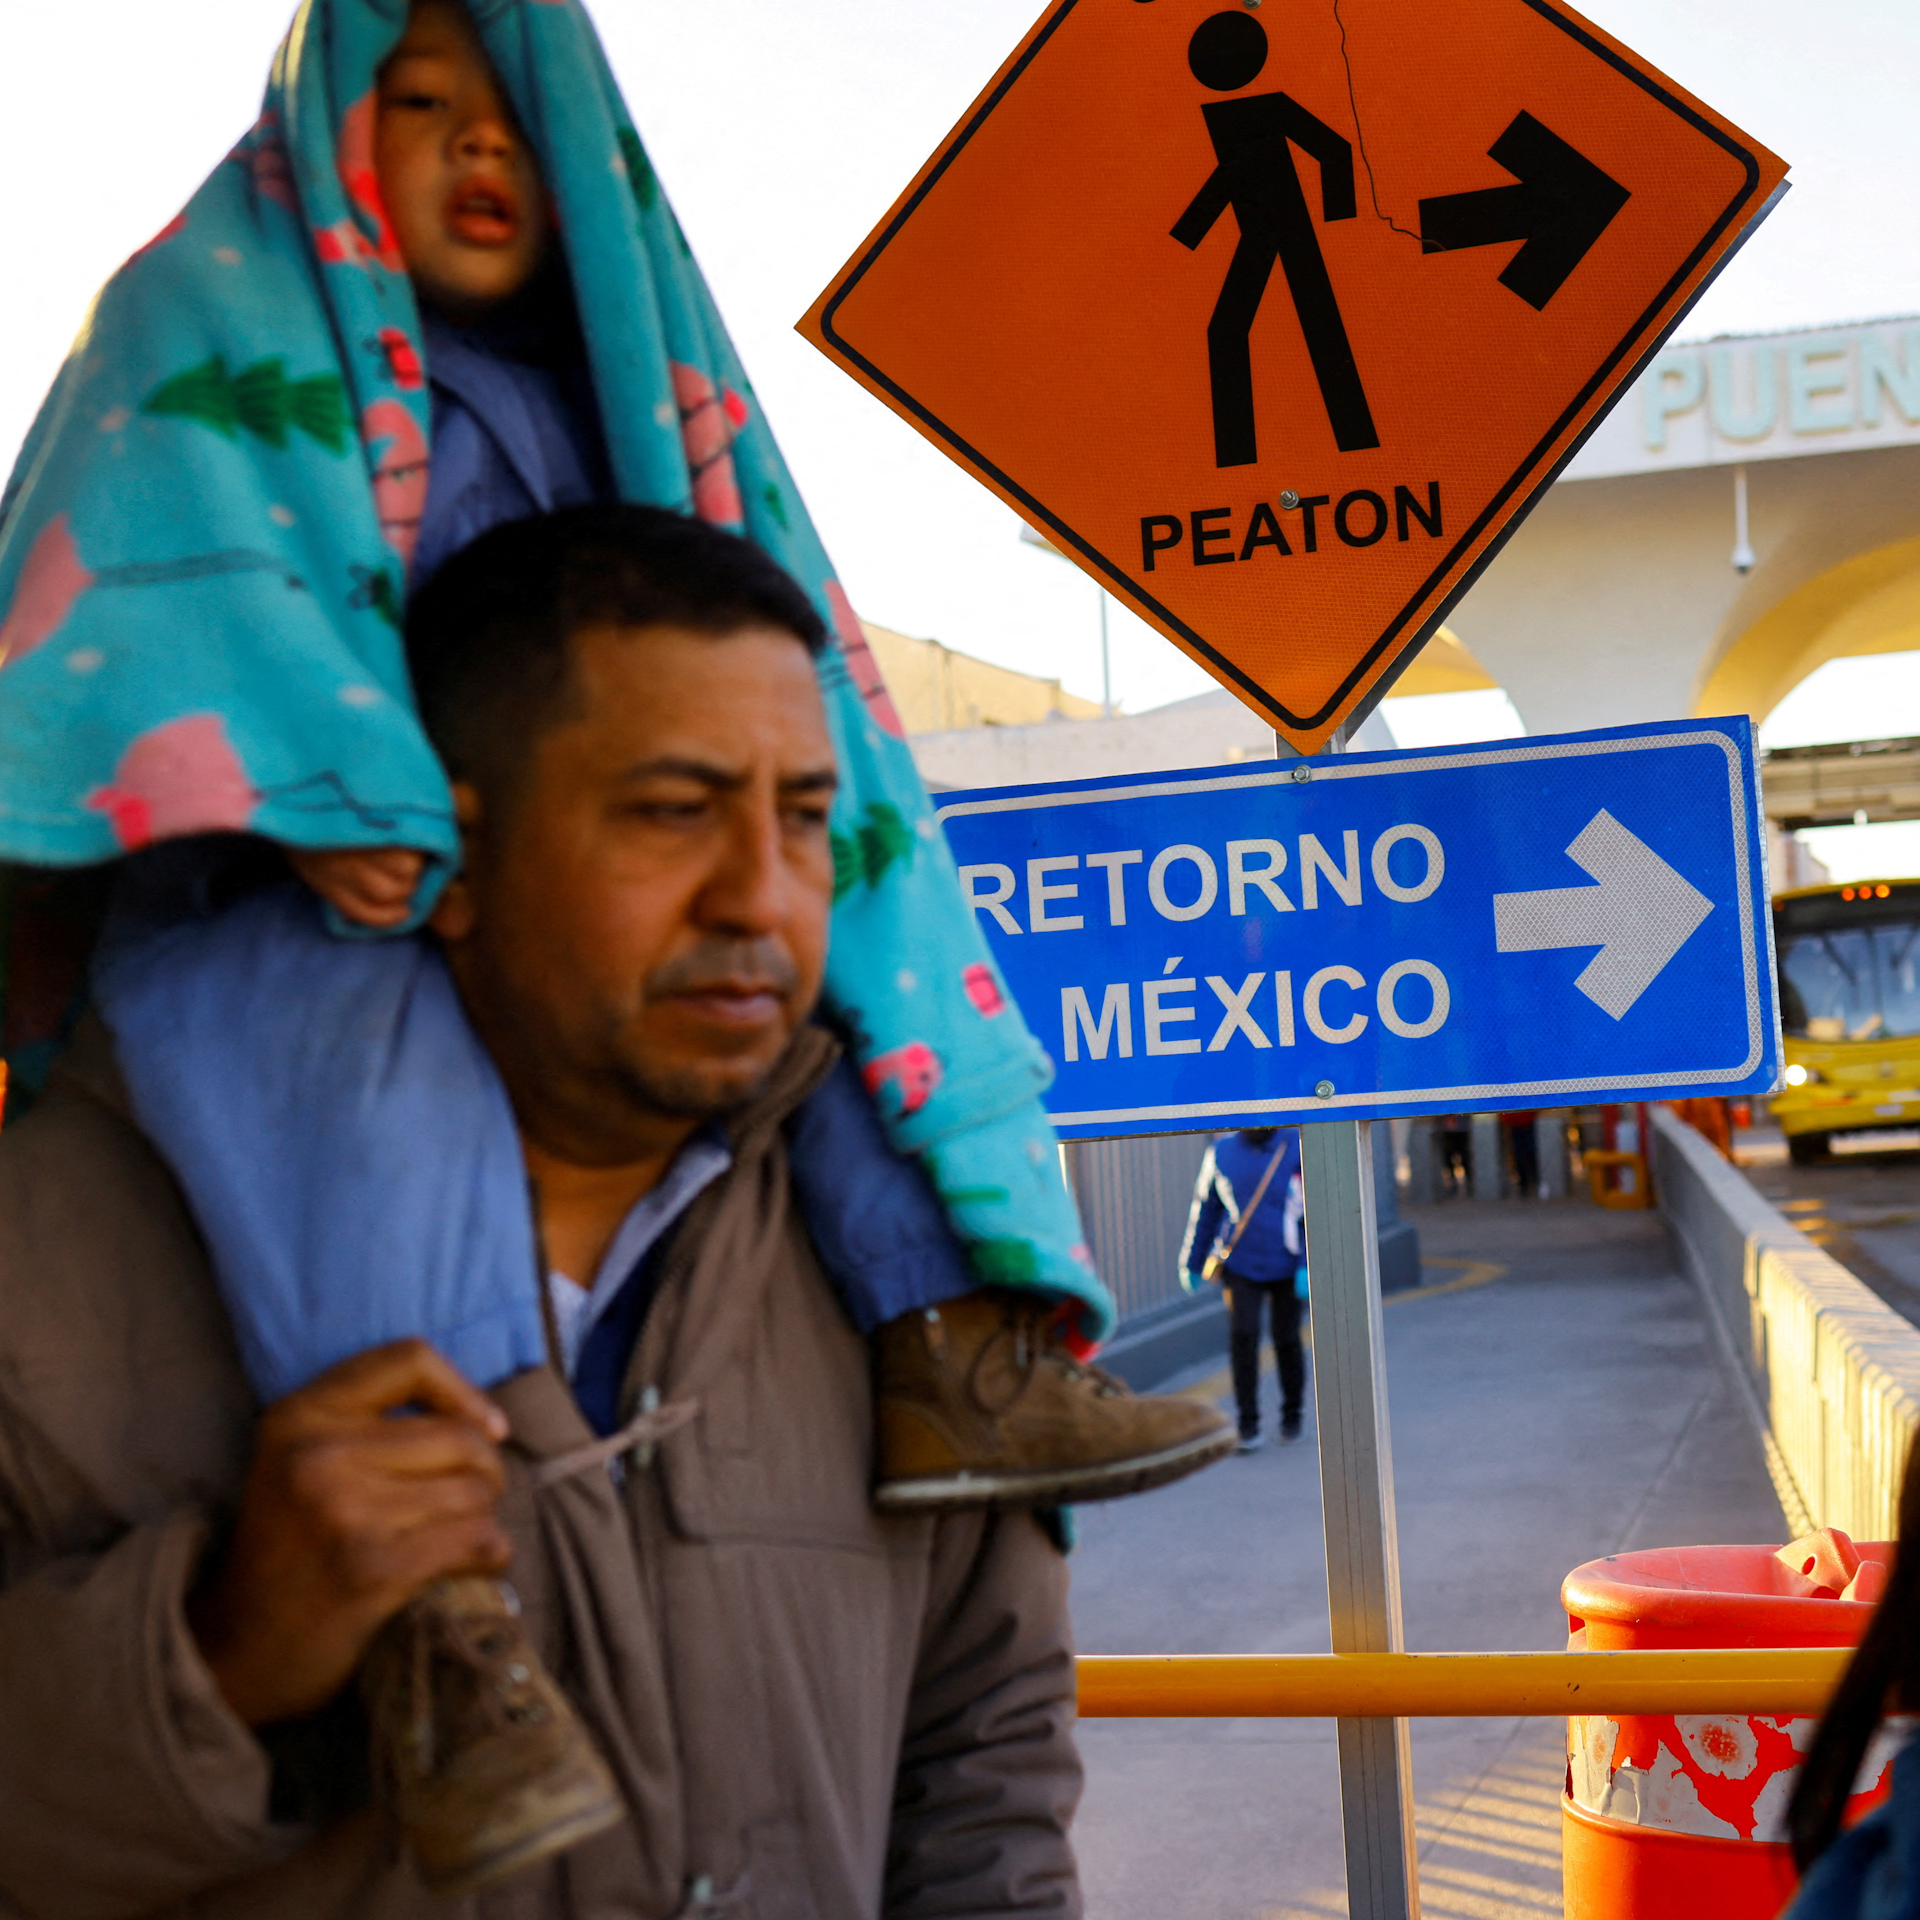 Why are some migrant families forced to split at the U.S.-Mexico border?